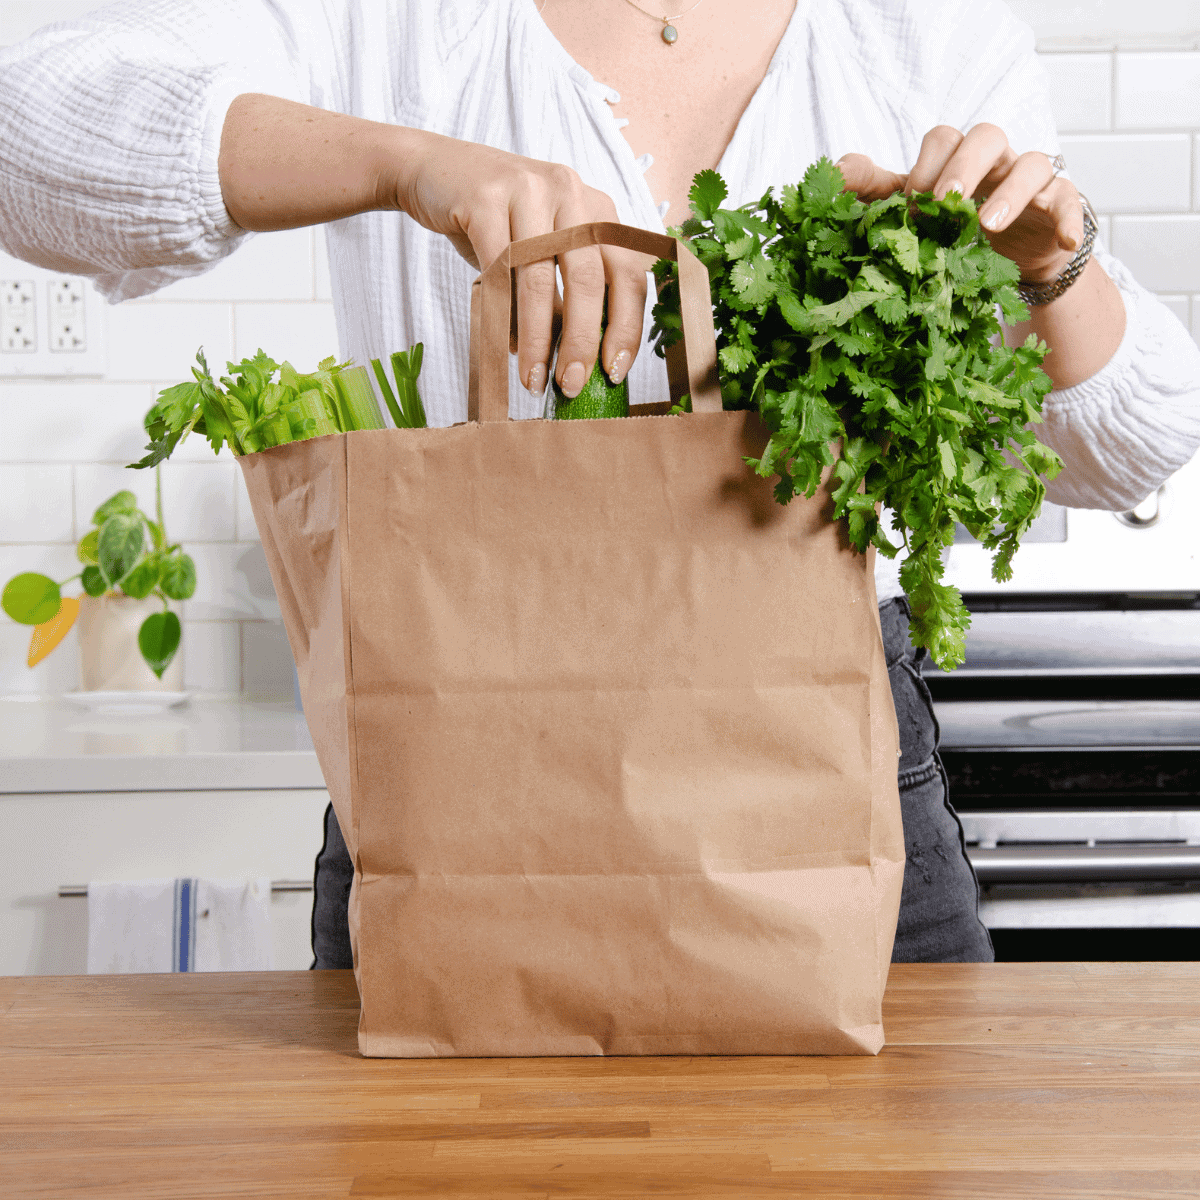 A woman grabbing fresh greens out of a paper grocery bag in a kitchen.